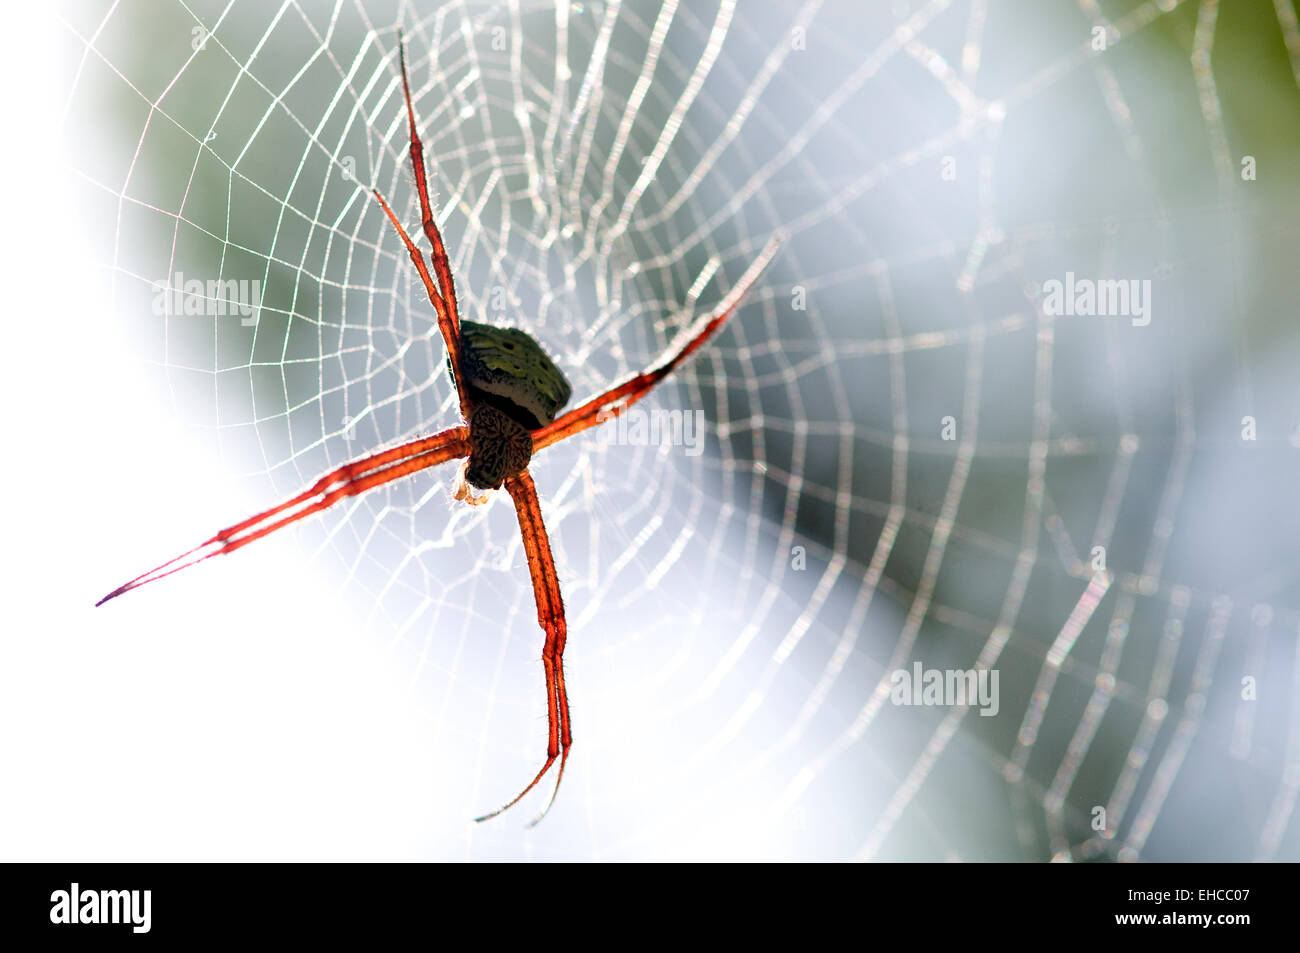 Spider in web. Stock Photo